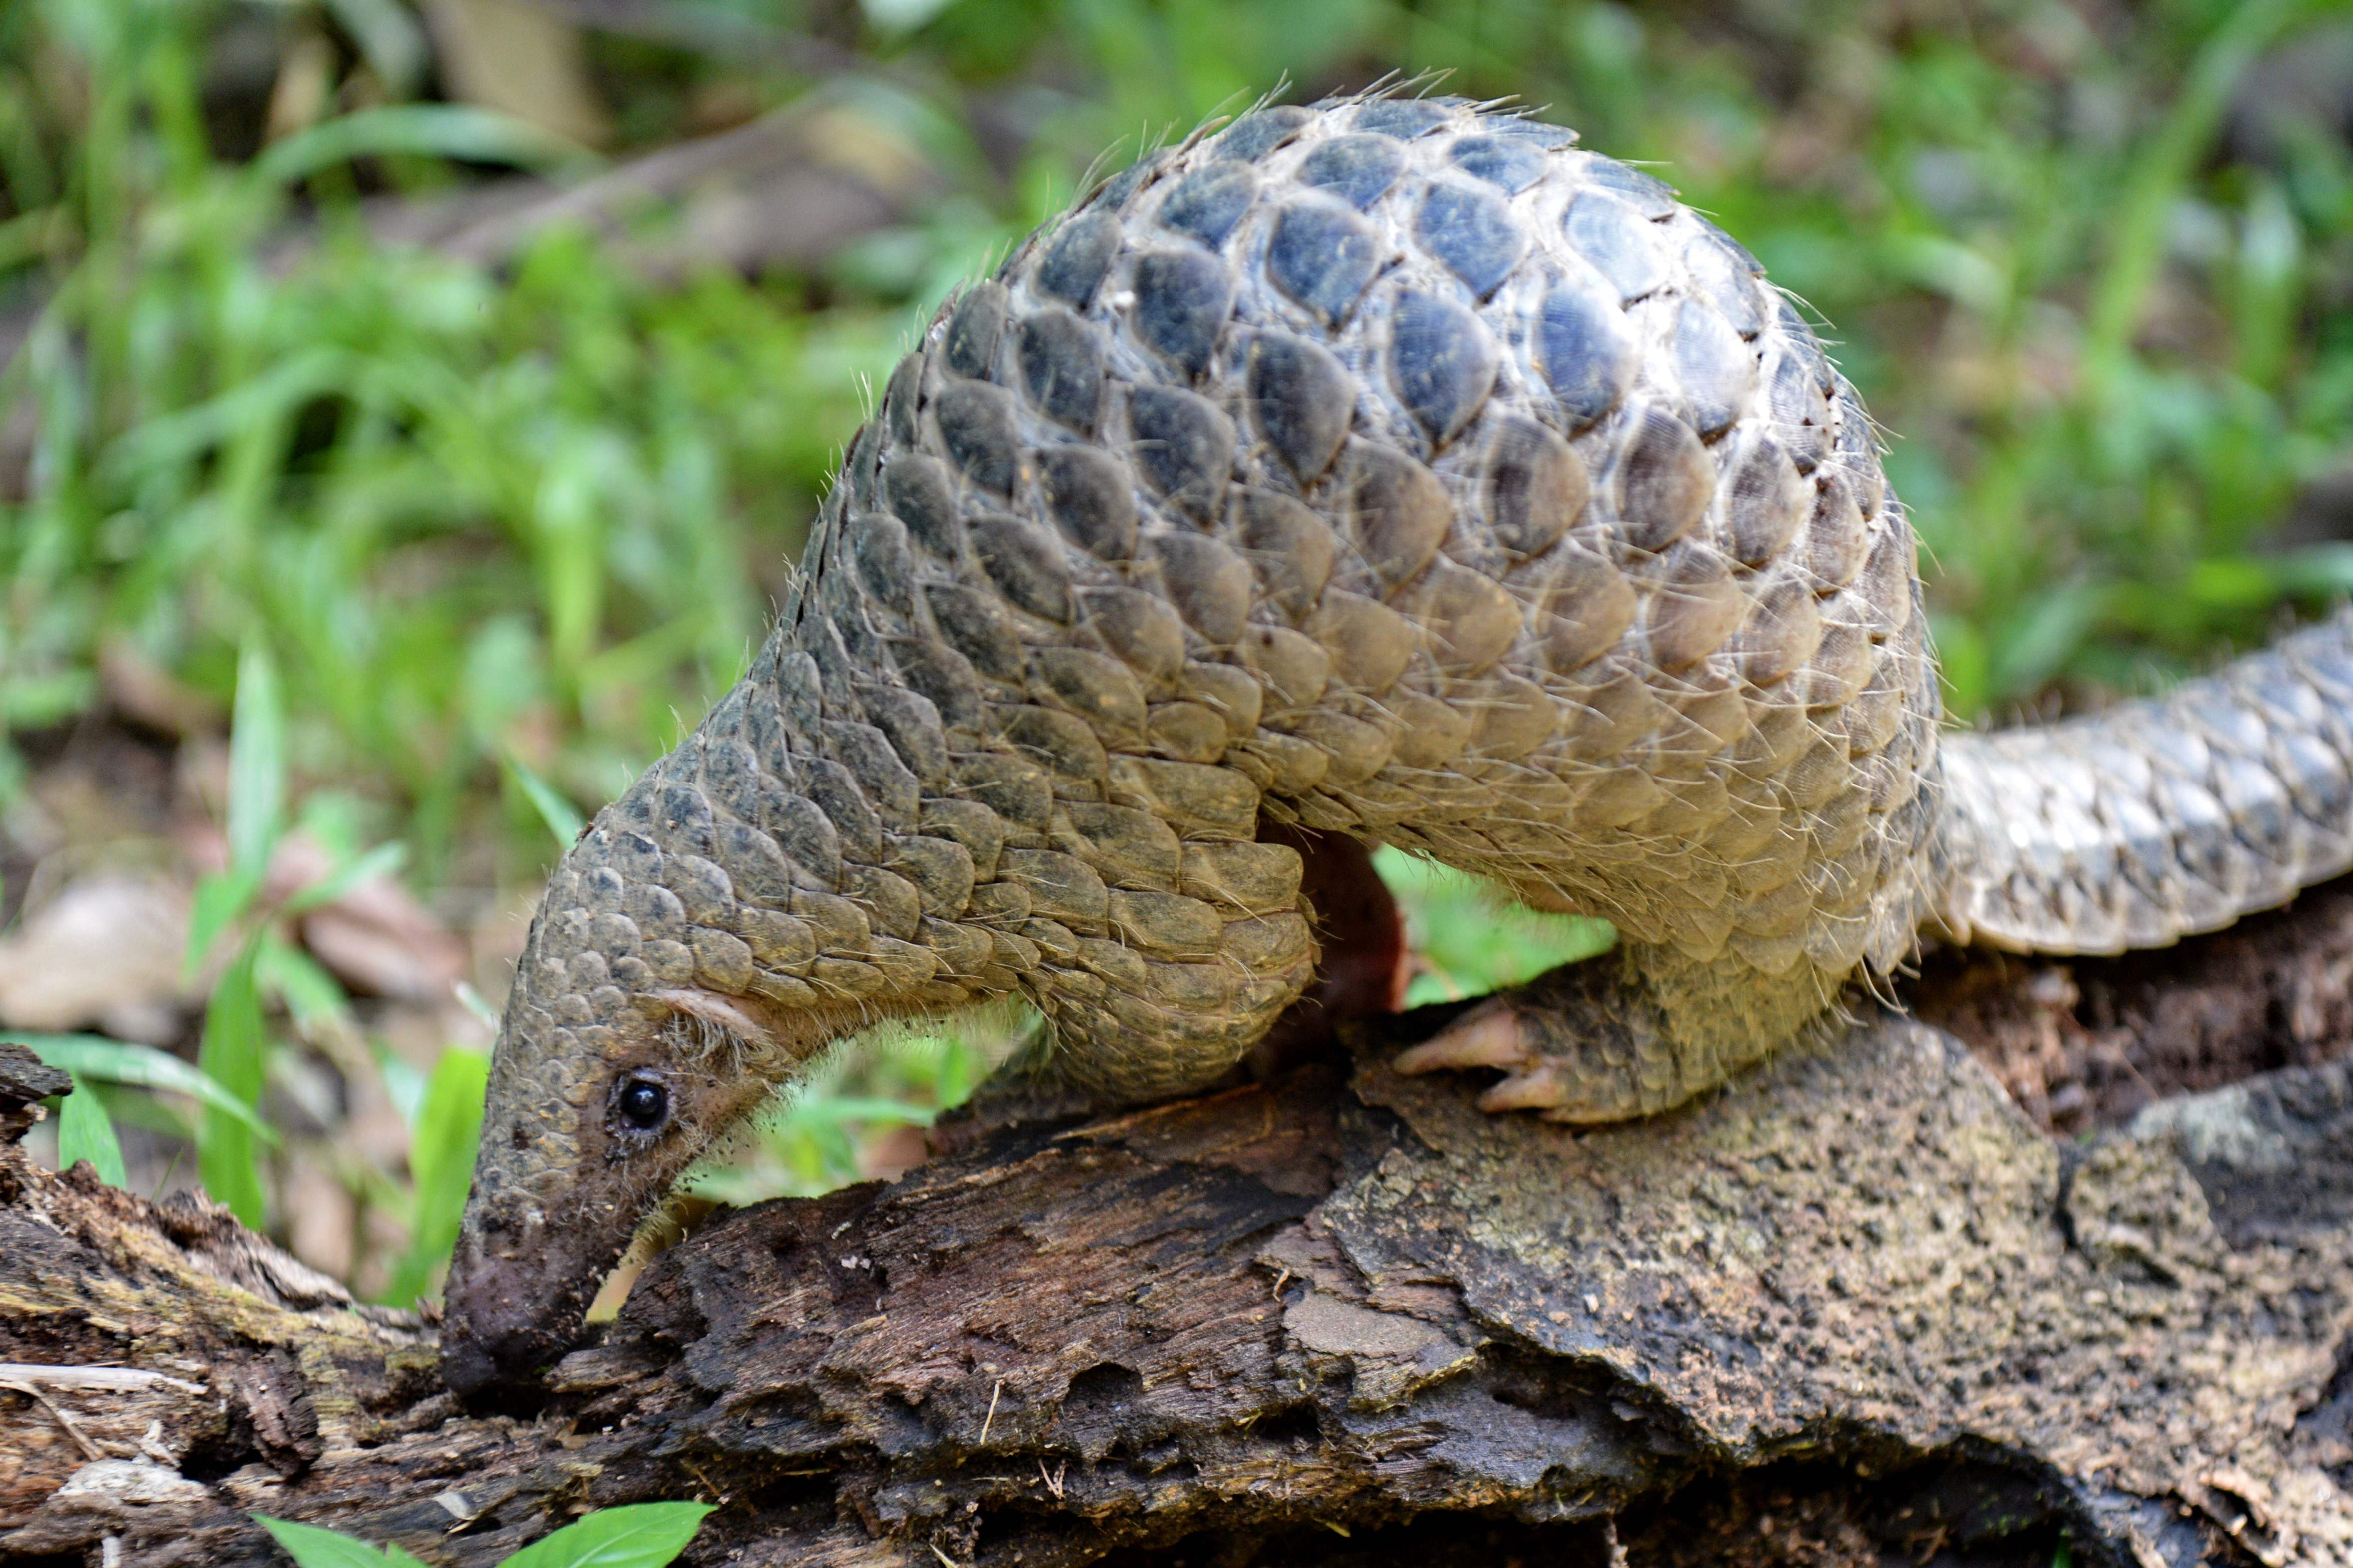 (FILES) In this file photo taken on June 30, 2017, a juvenile Sunda pangolin feeds on termites at the Singapore Zoo. - The endangered pangolin may be the link that facilitated the spread of the novel coronavirus across China, Chinese scientists said on February 7, 2020. Researchers at the South China Agricultural University have identified the scaly mammal as a "potential intermediate host," the university said in a statement, without providing further details. (Photo by ROSLAN RAHMAN / AFP)